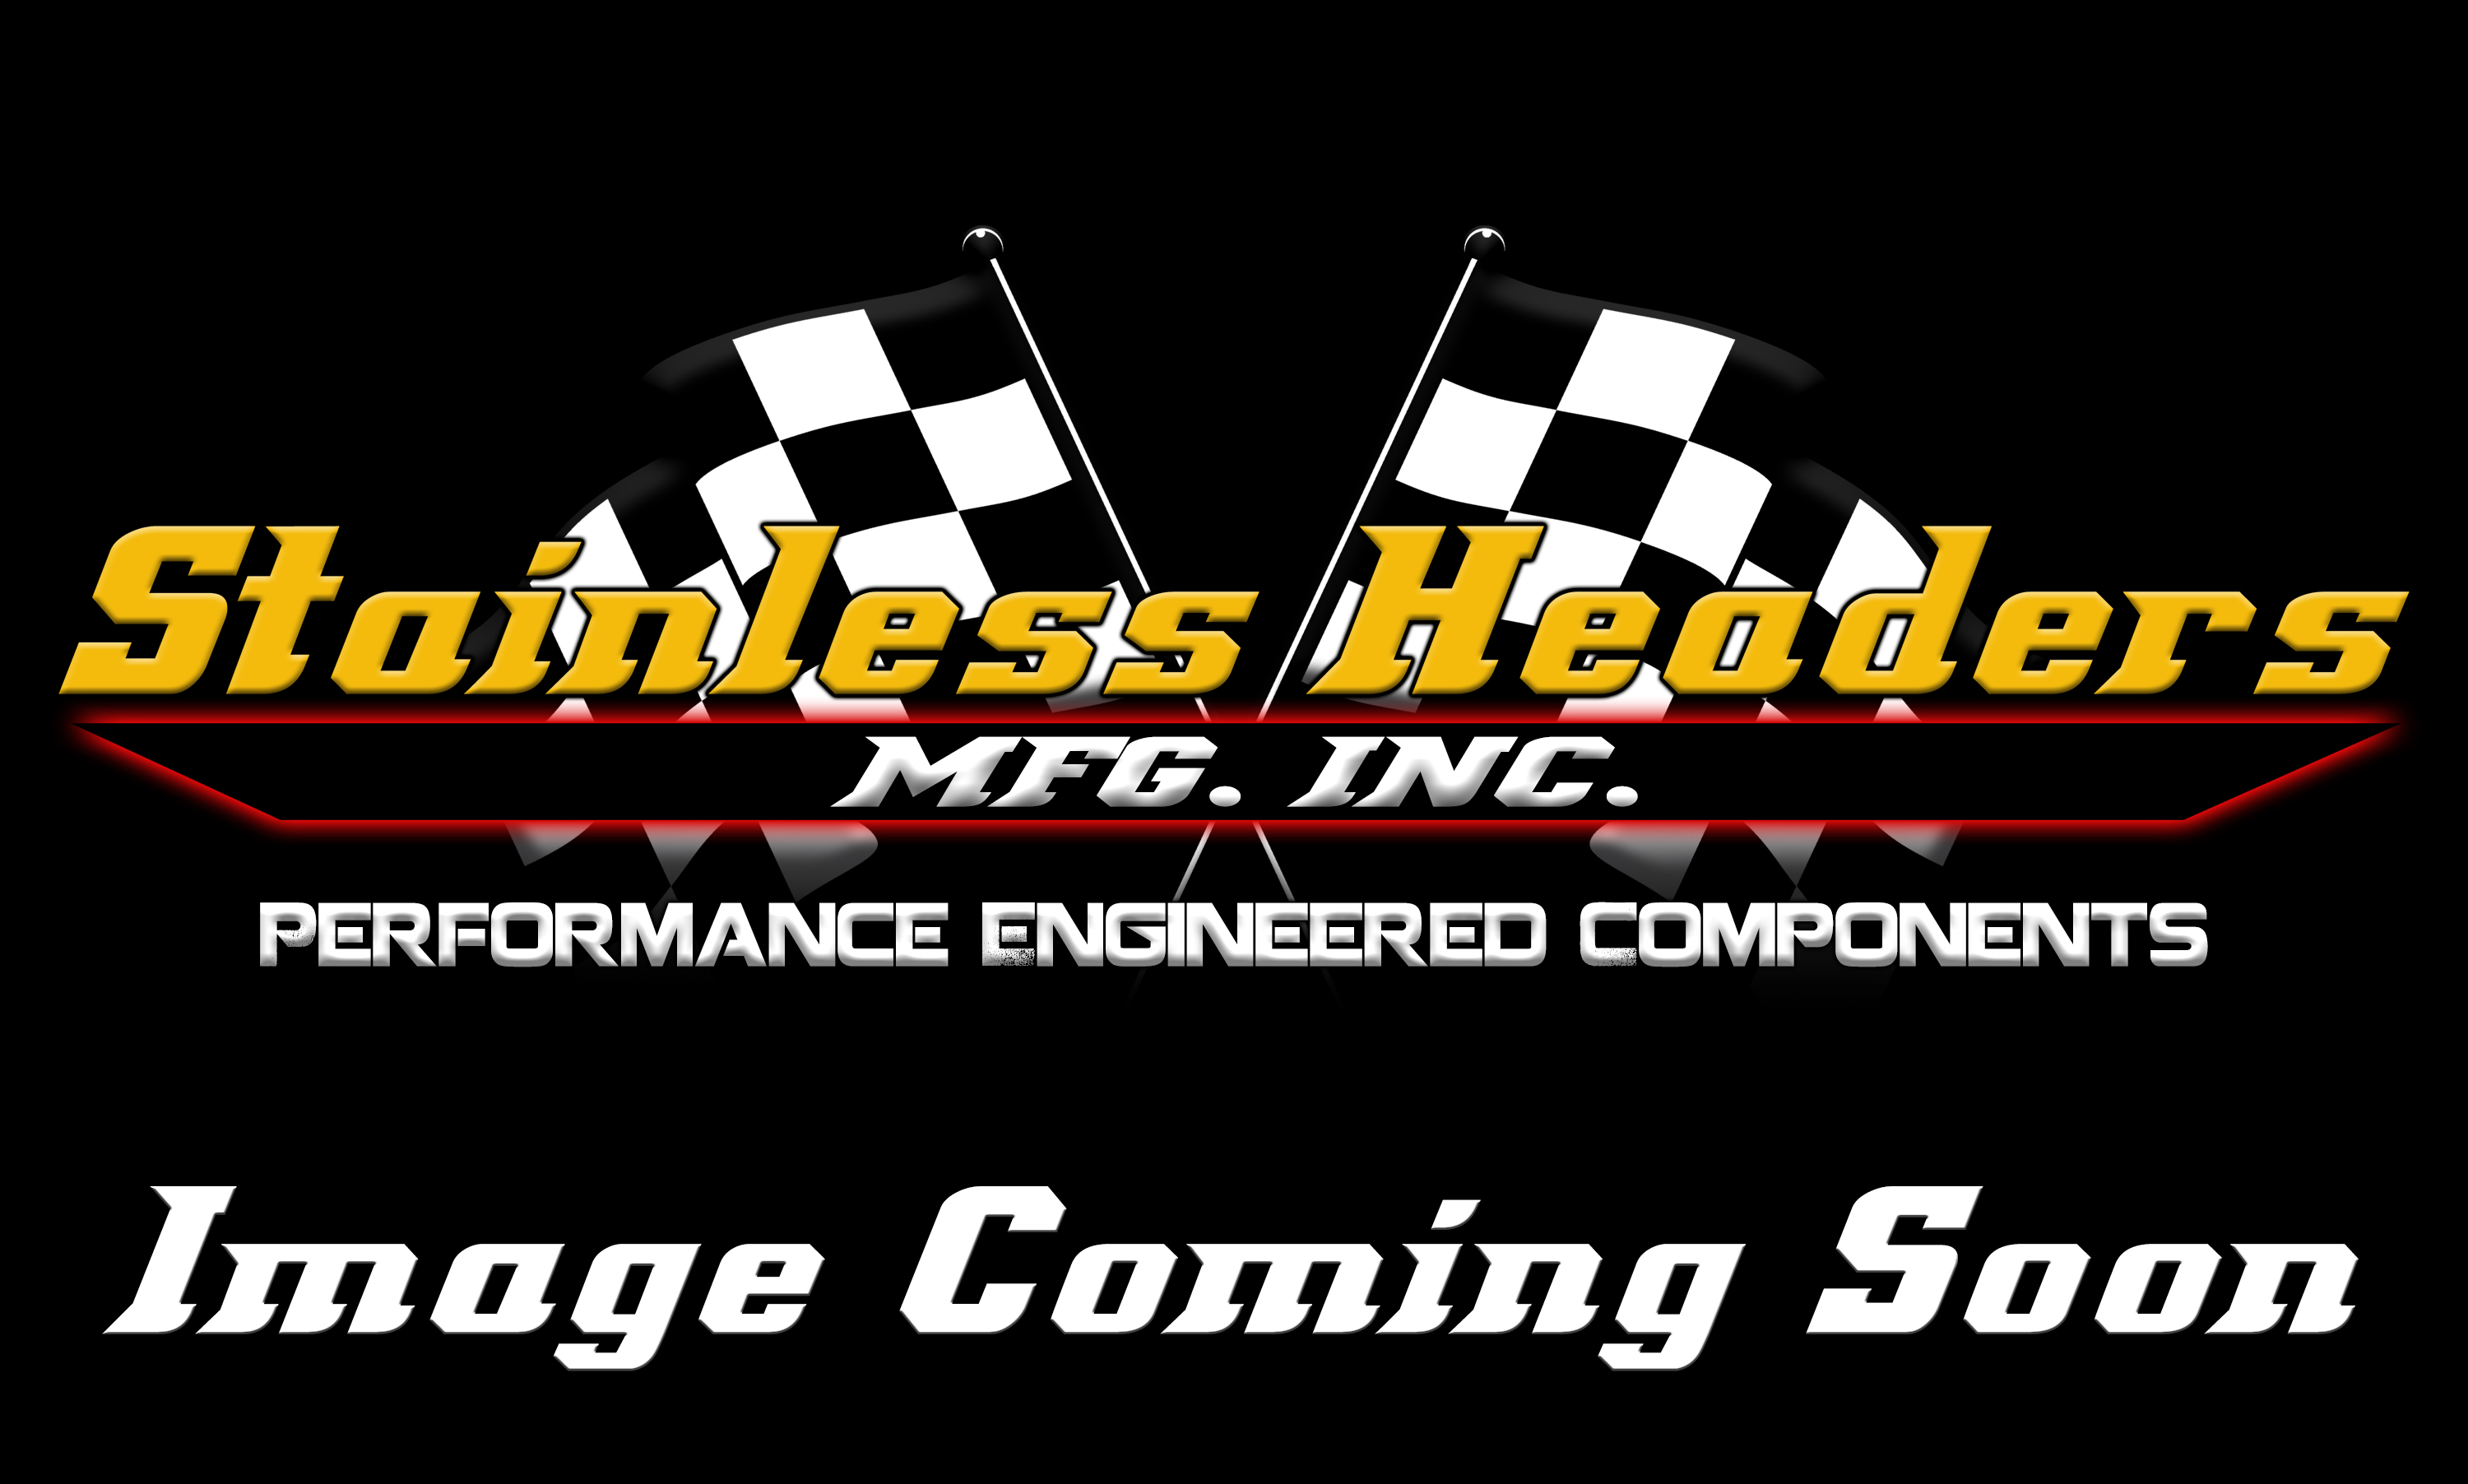 CompTurbo Technologies - CTR4828R-8890 Mid Frame Oil Lubricated 2.0 Turbocharger (1850 HP) - Image 2